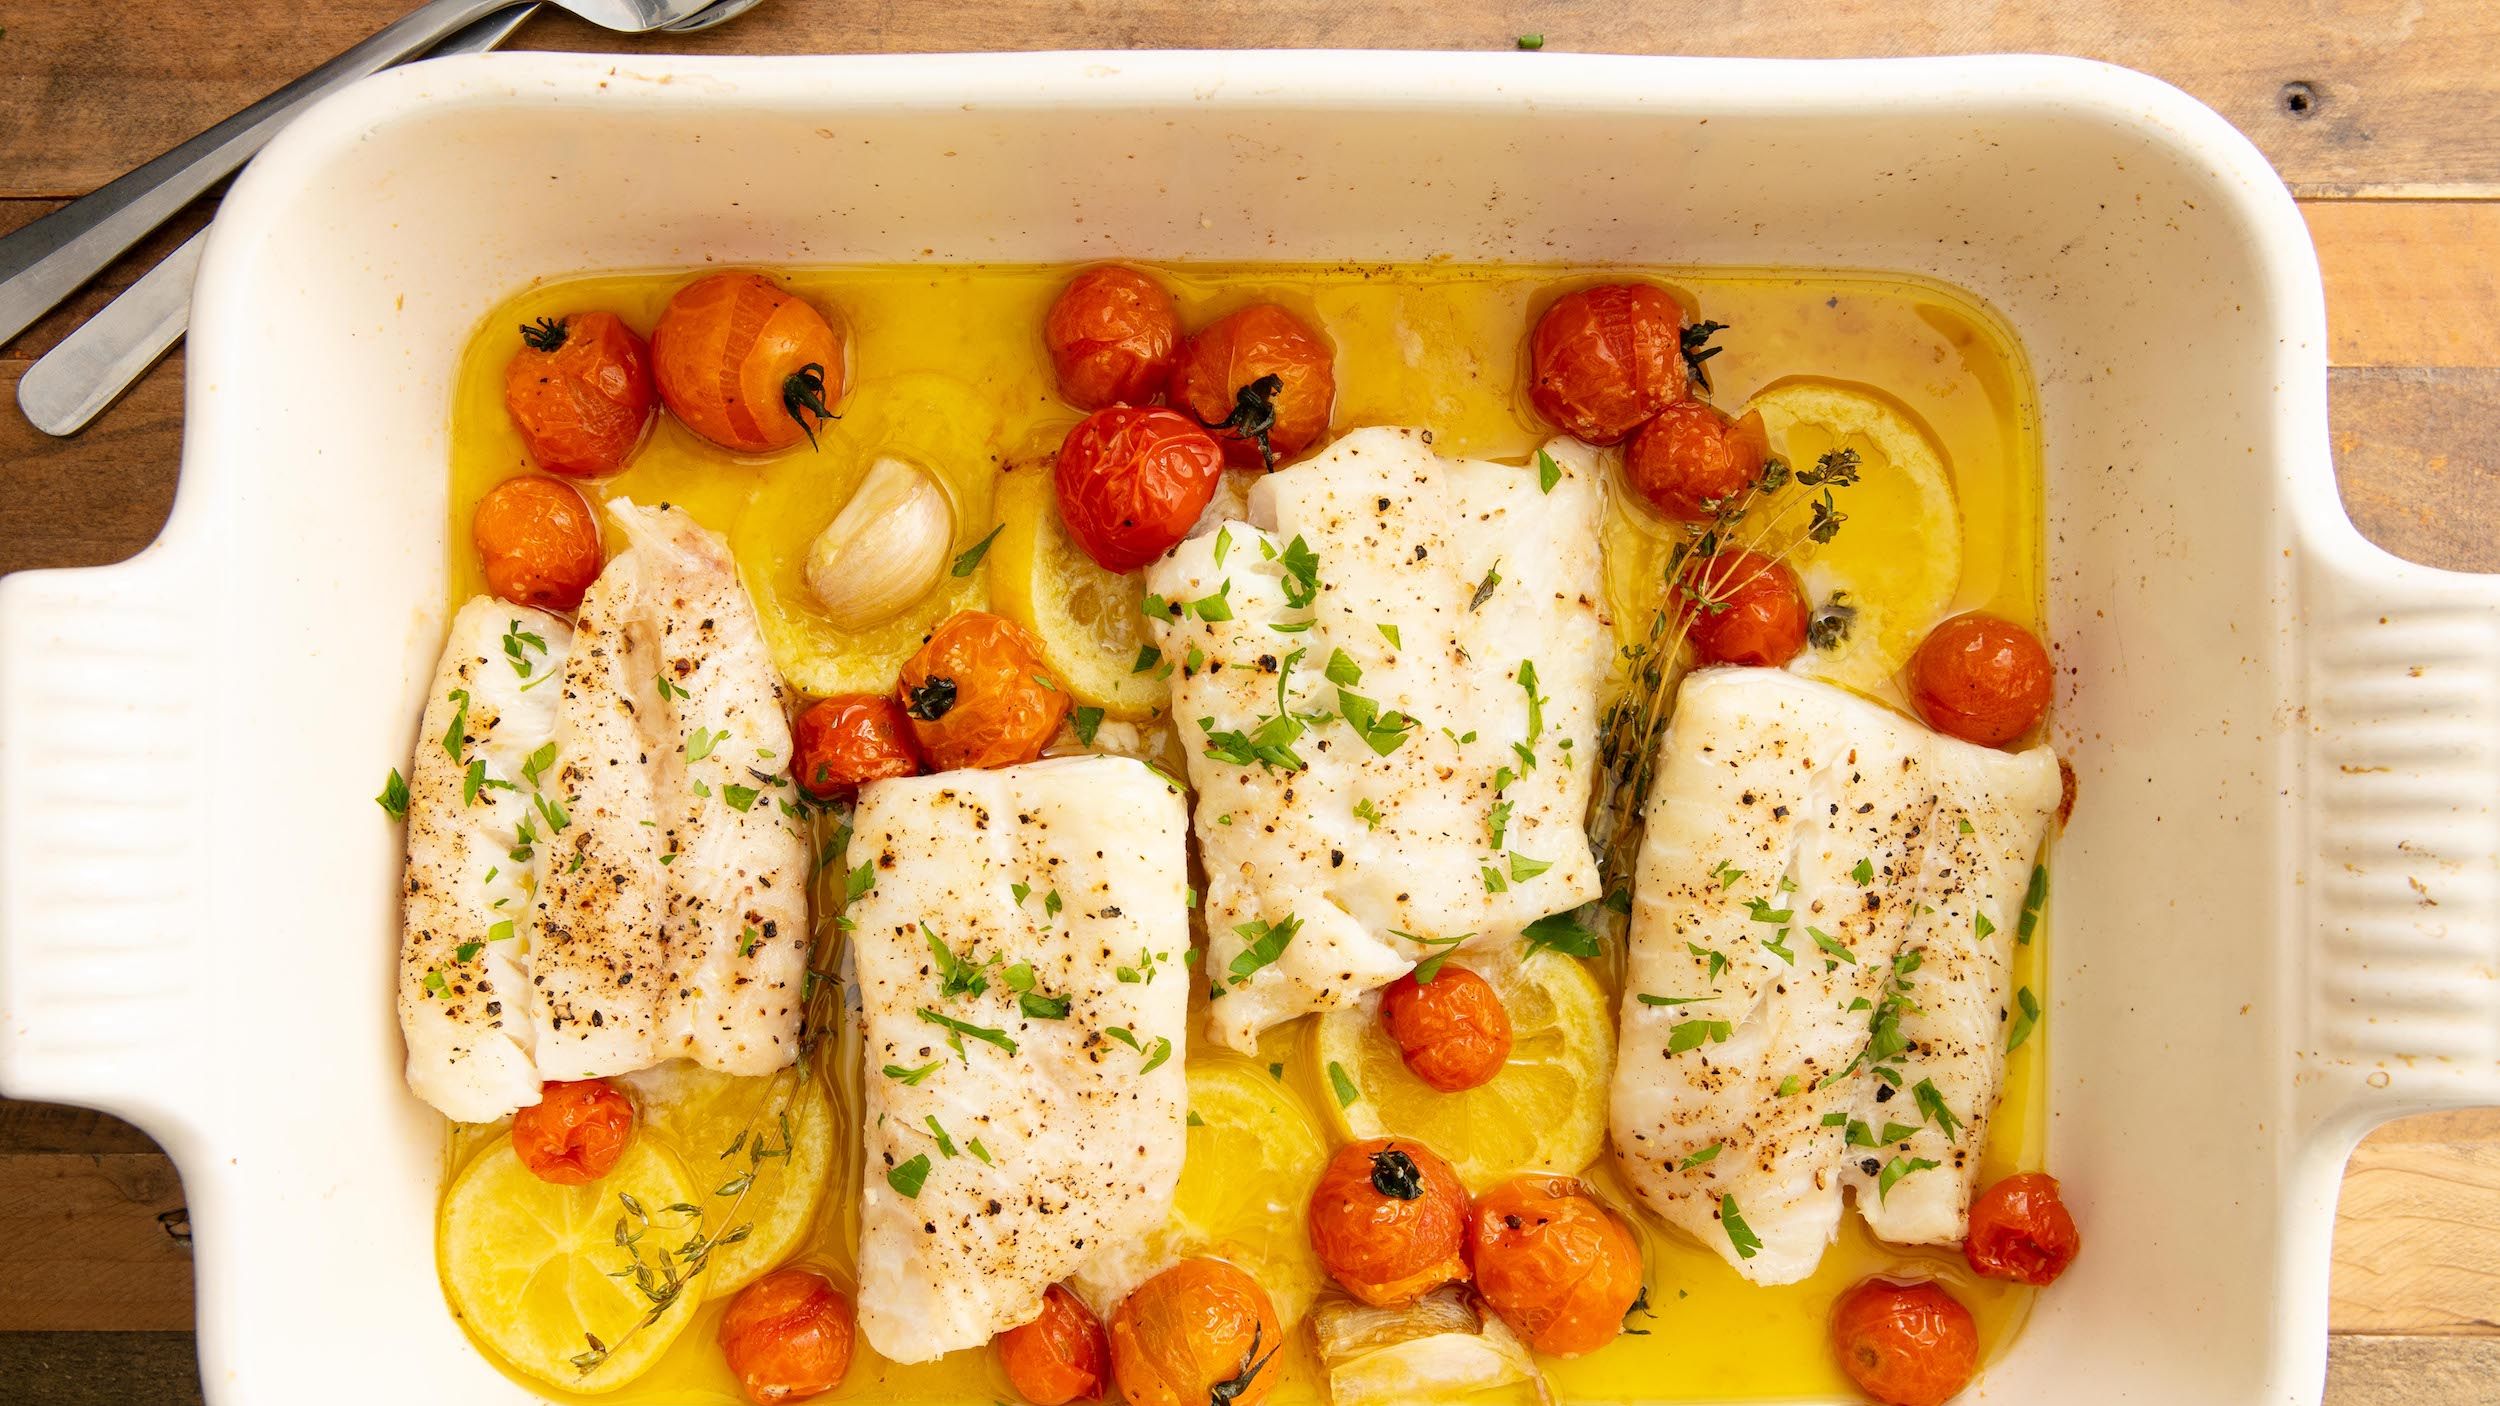 Have you seen our NEW bake-and-serve fish meals? Just like our